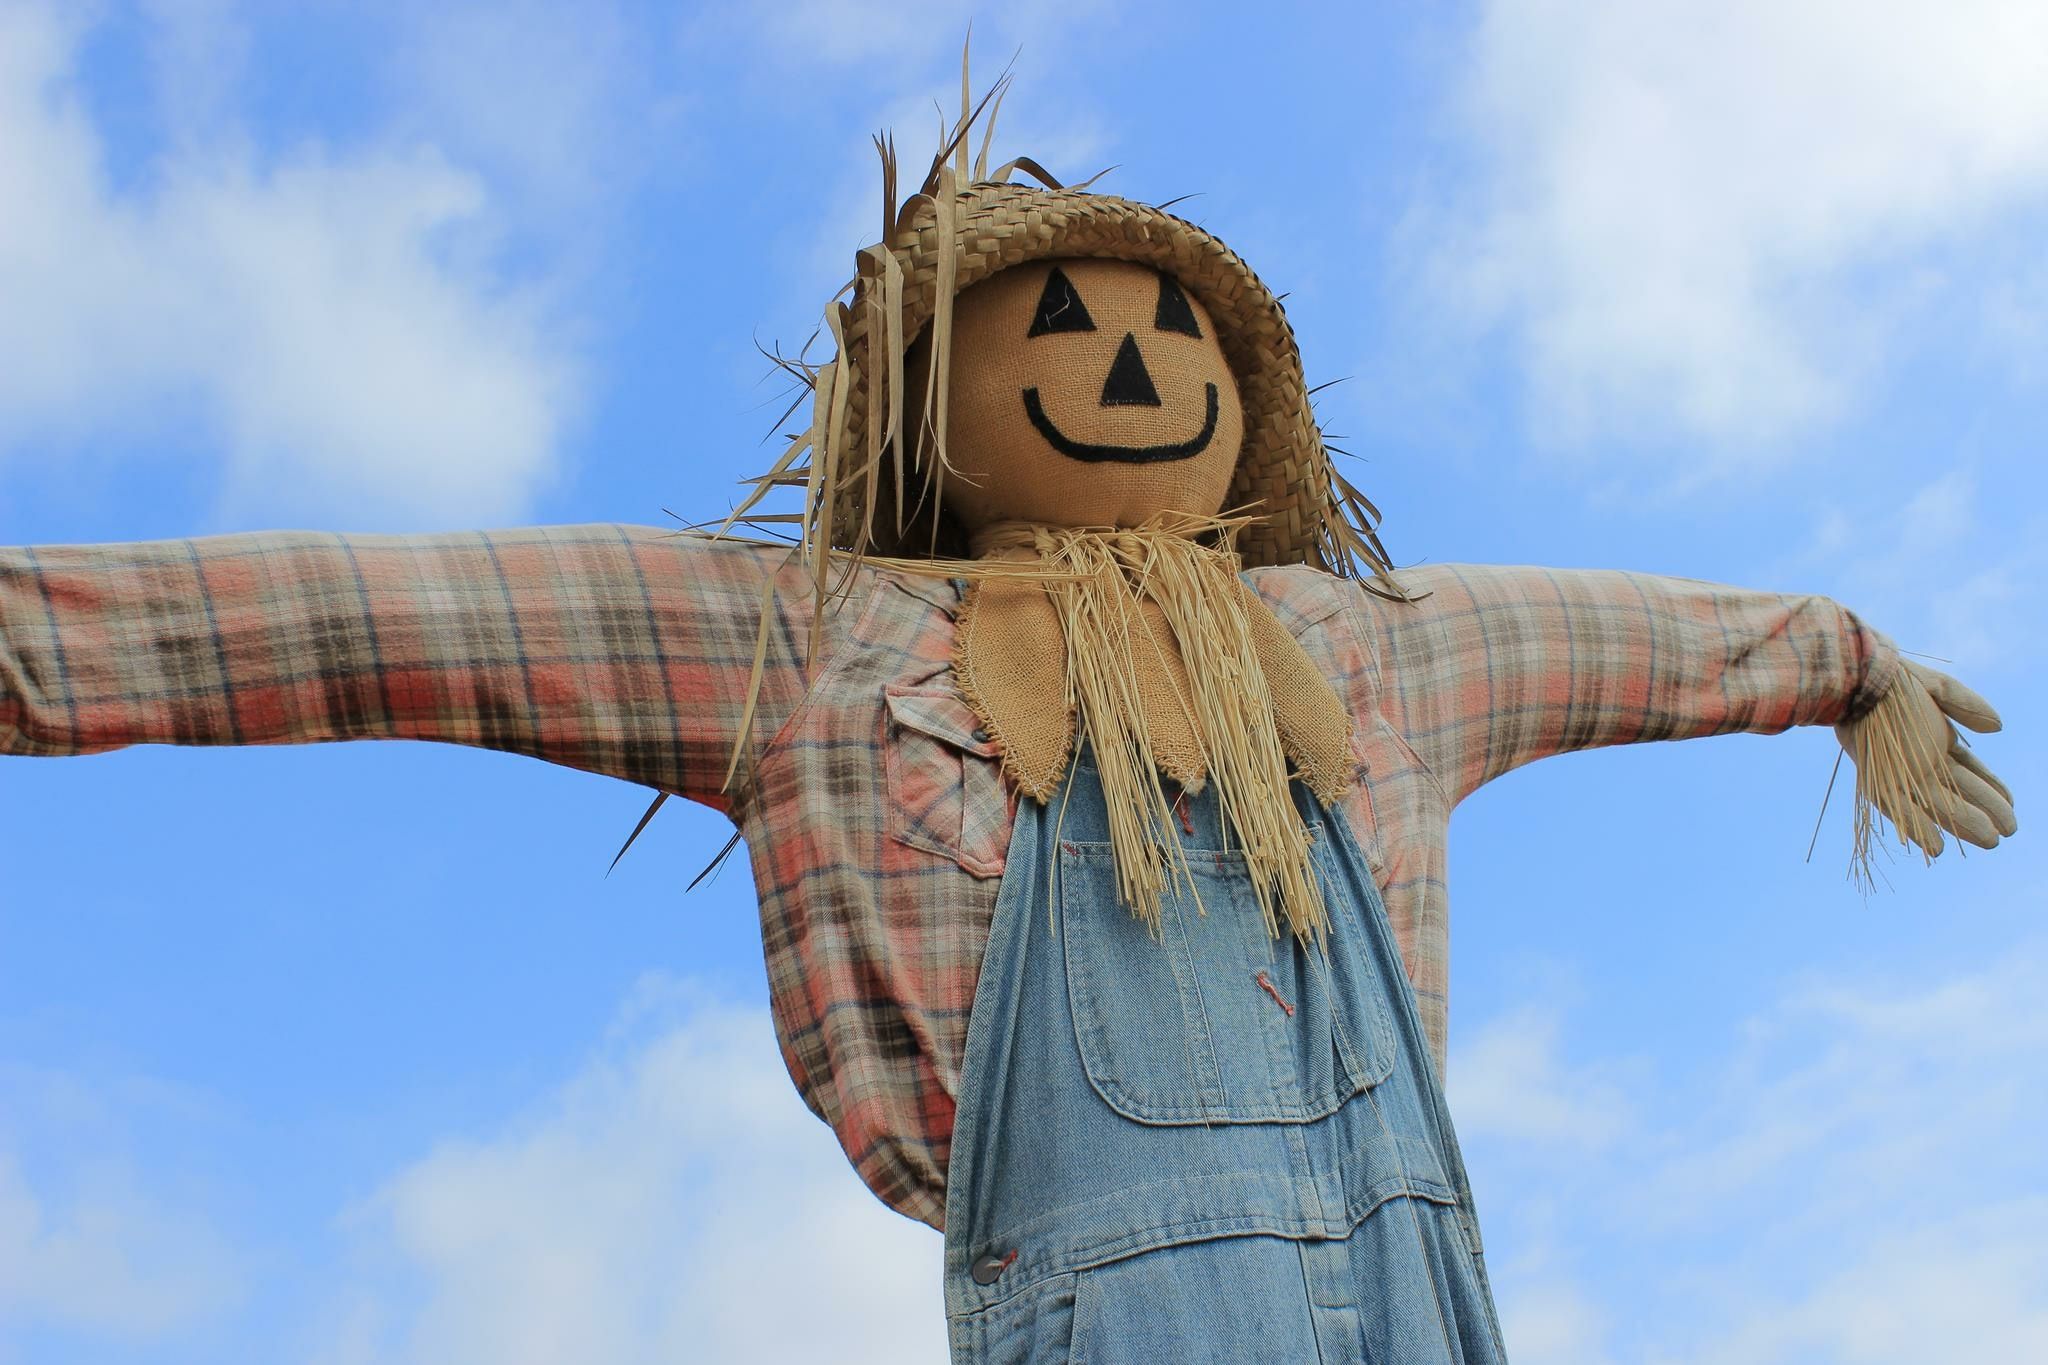 low-angle-view-scarecrow-against-cloudy-sky-562838541-5aaf18adfa6bcc00360a609c.jpg